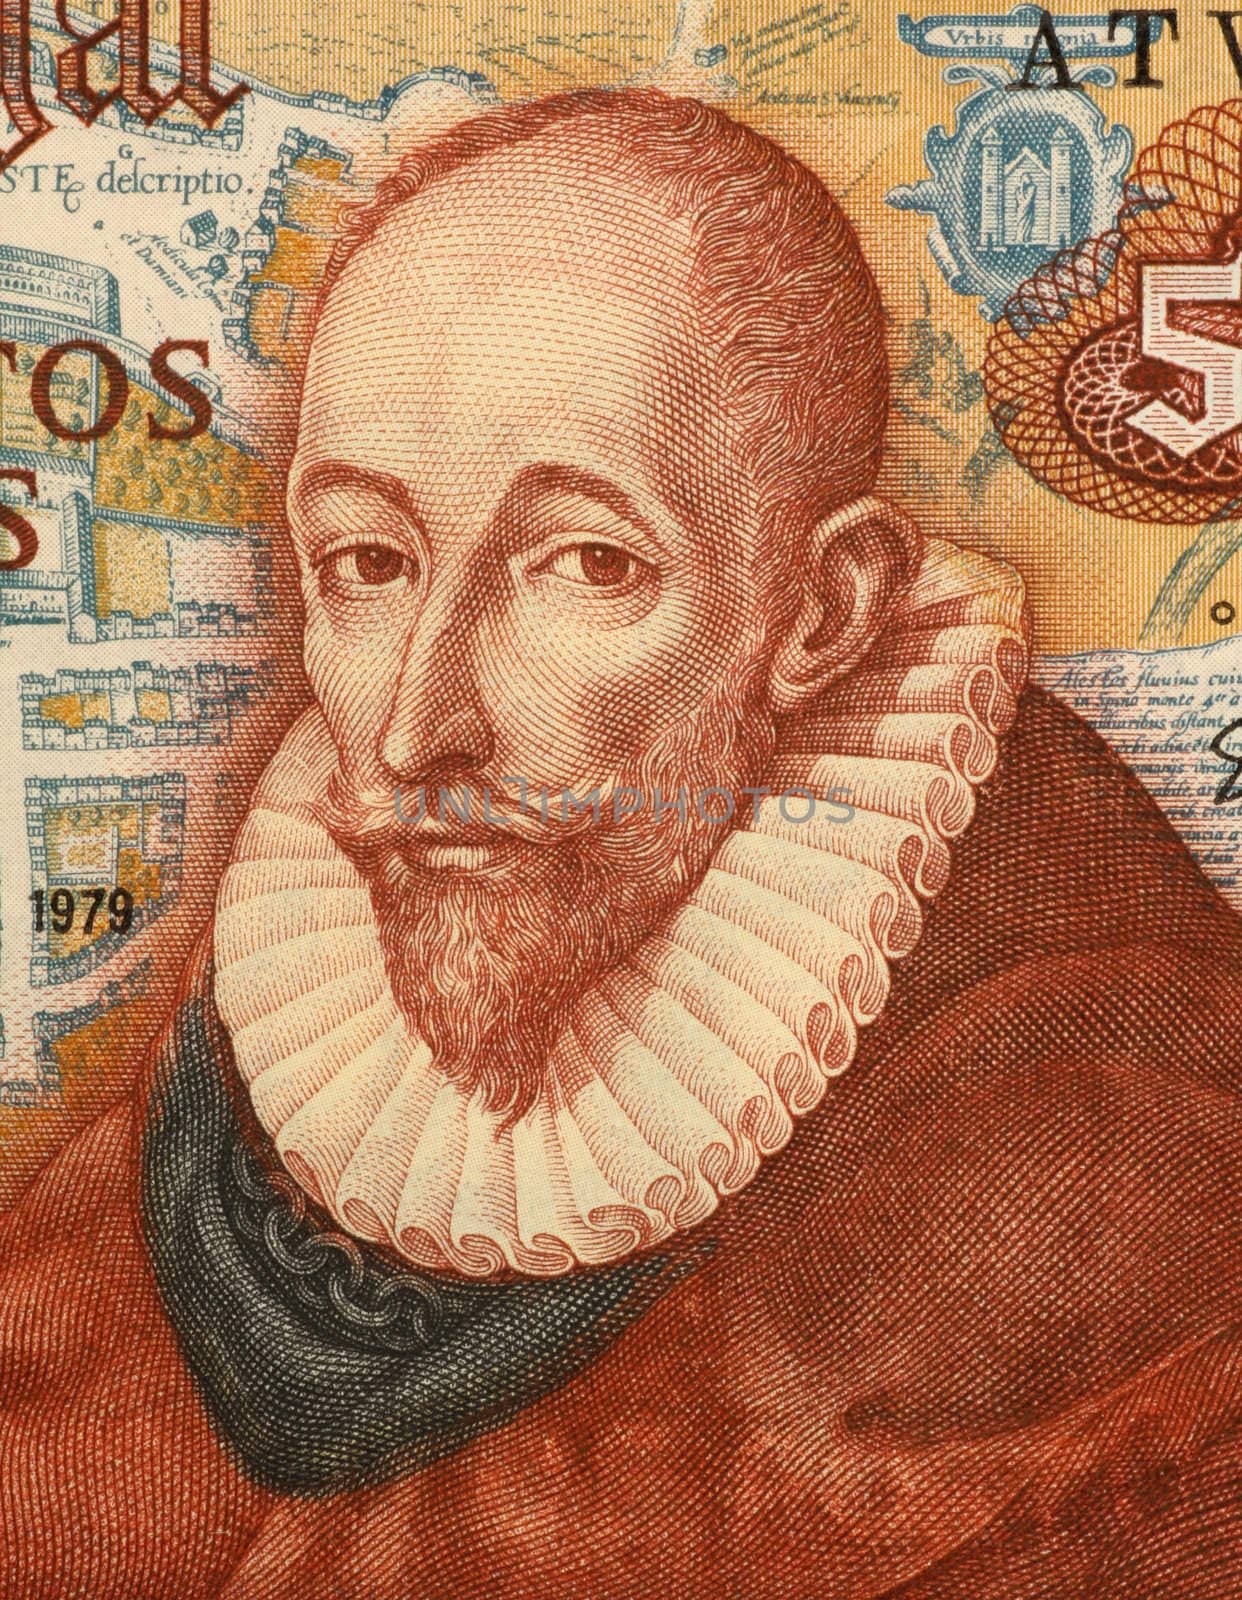 Francisco Sanchez on 500 Escudos 1979 Banknote from Portugal. Portuguese philosopher and physician.